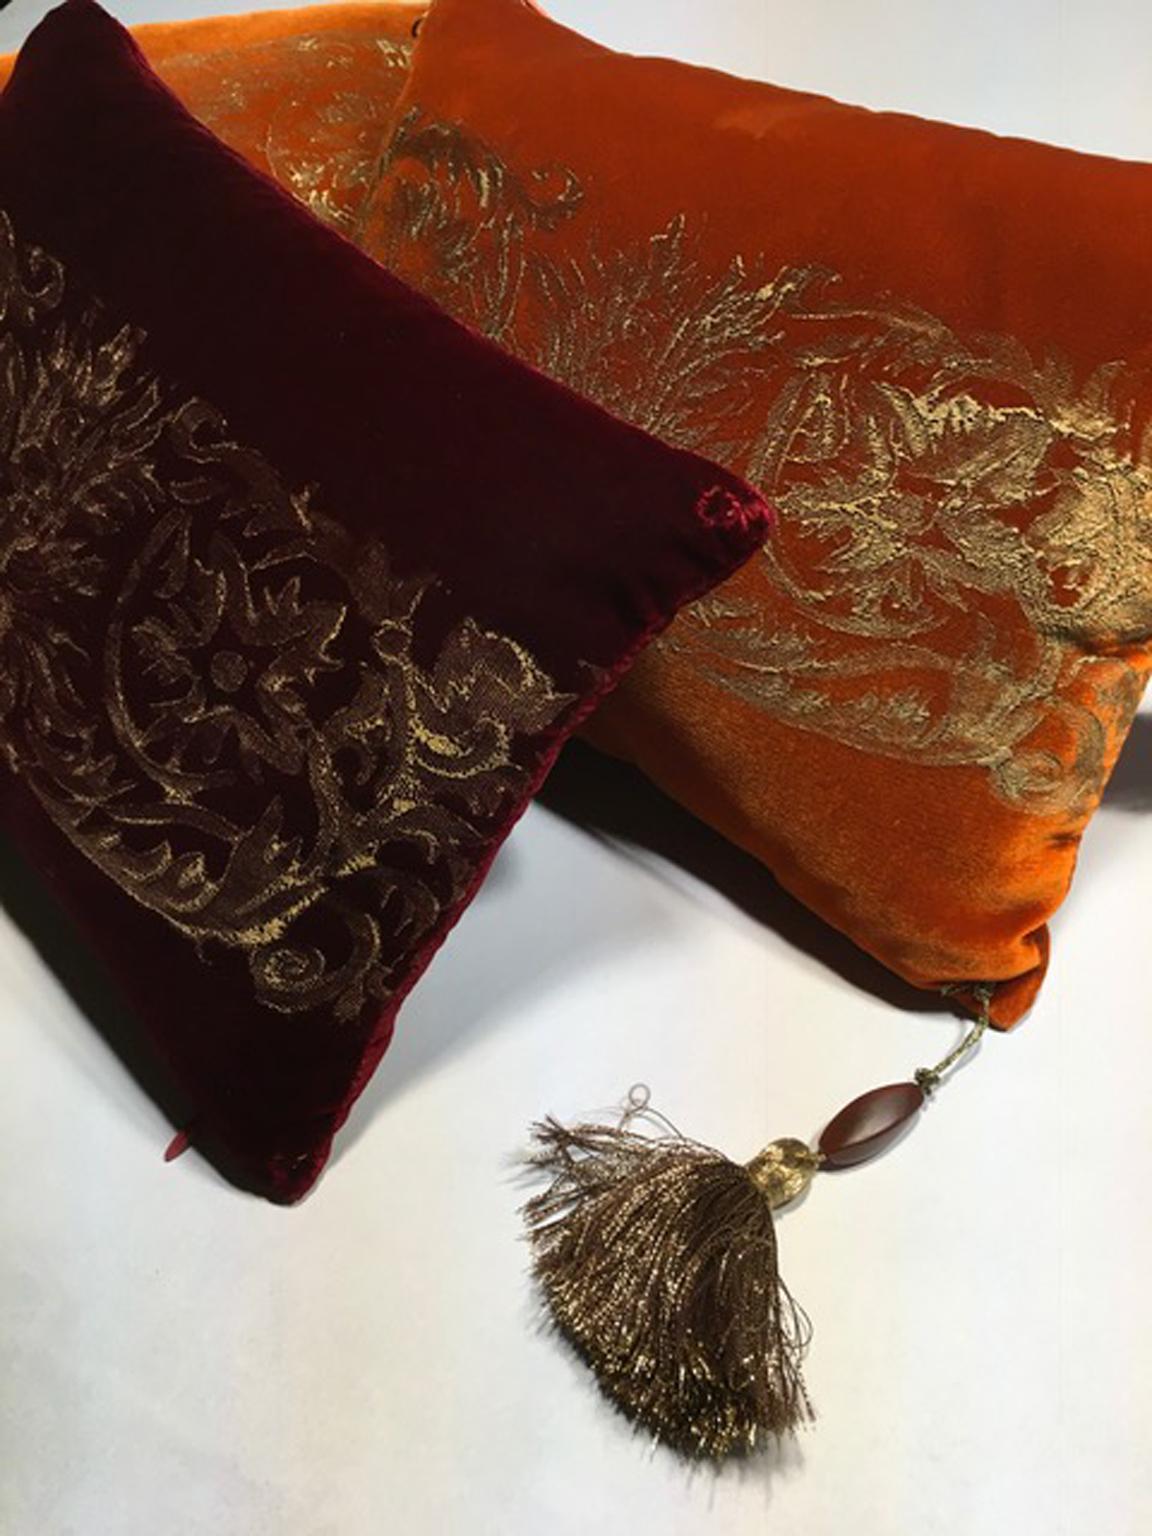 Contemporary Fortuny Venice Style Set Three Orange Silk Pillows in Golden Color Hand Printed